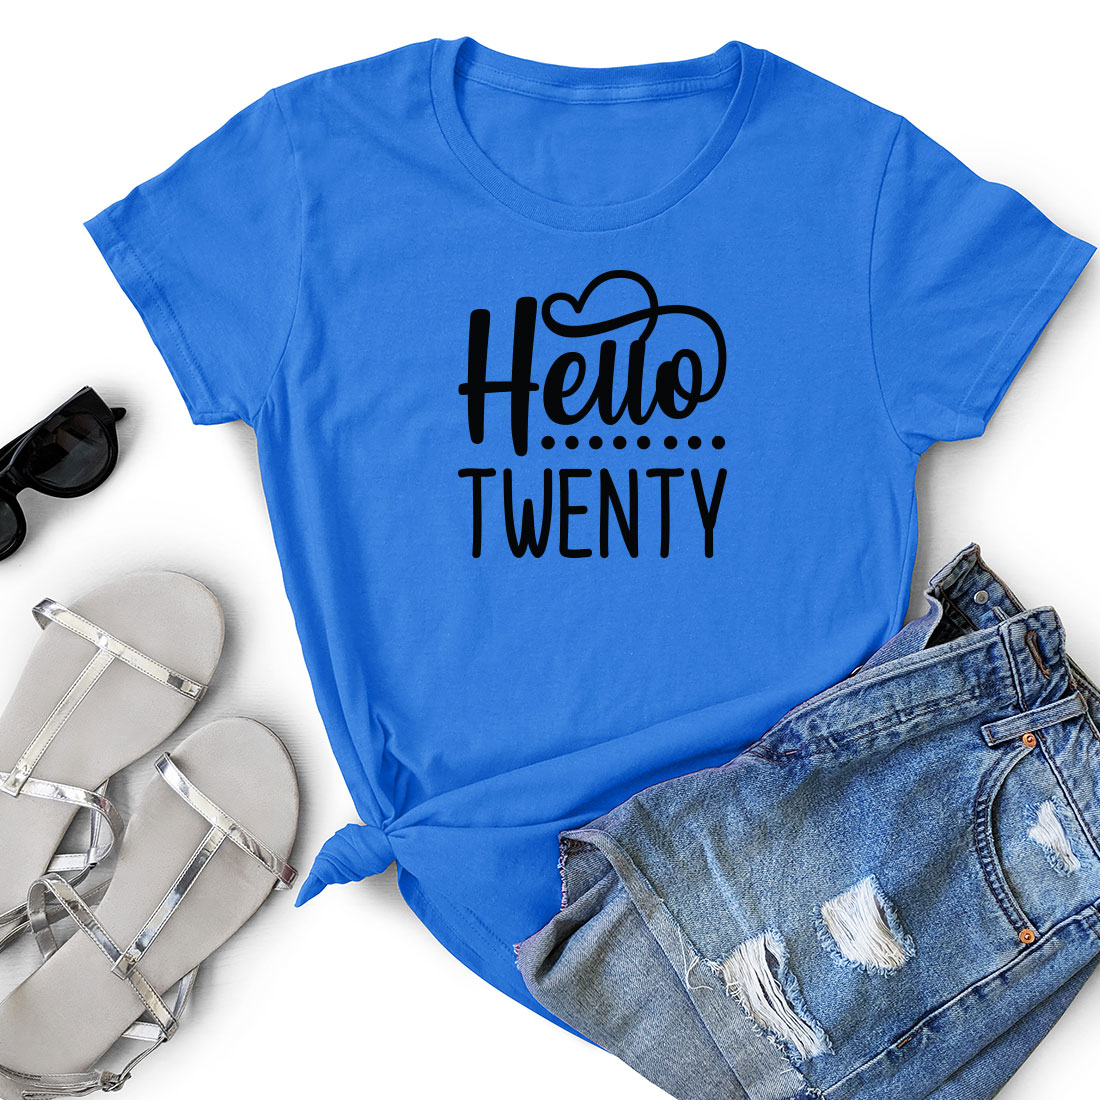 T - shirt with the words hello twenty printed on it.